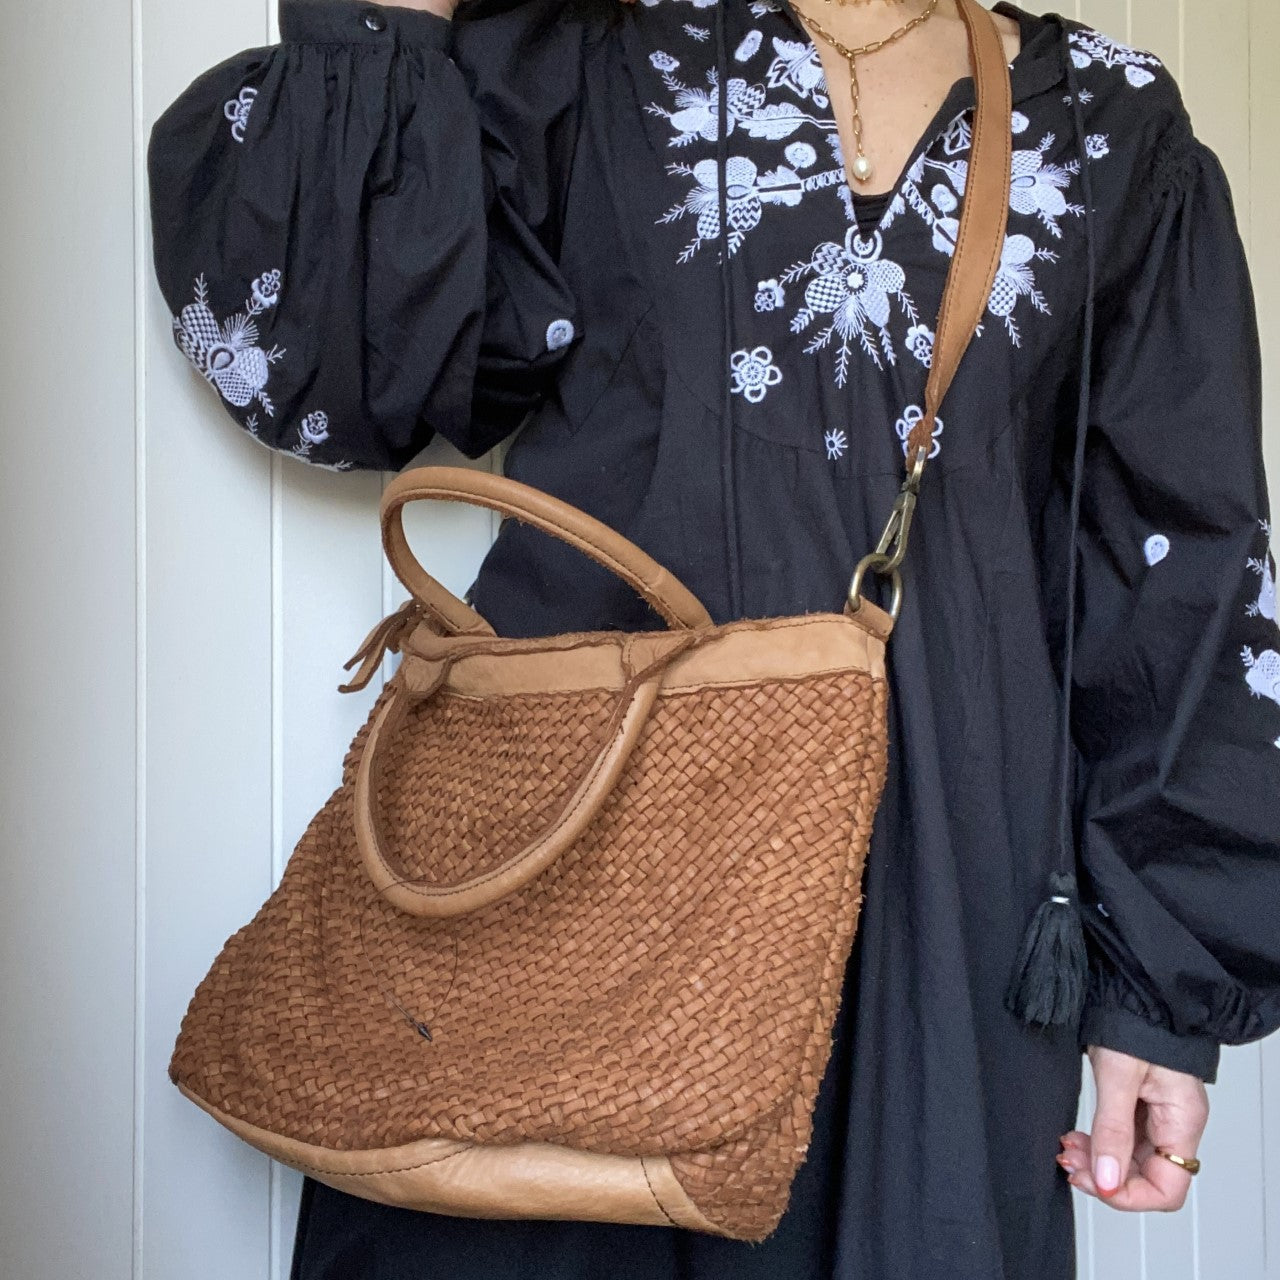 The Woven Leather Tote Bag